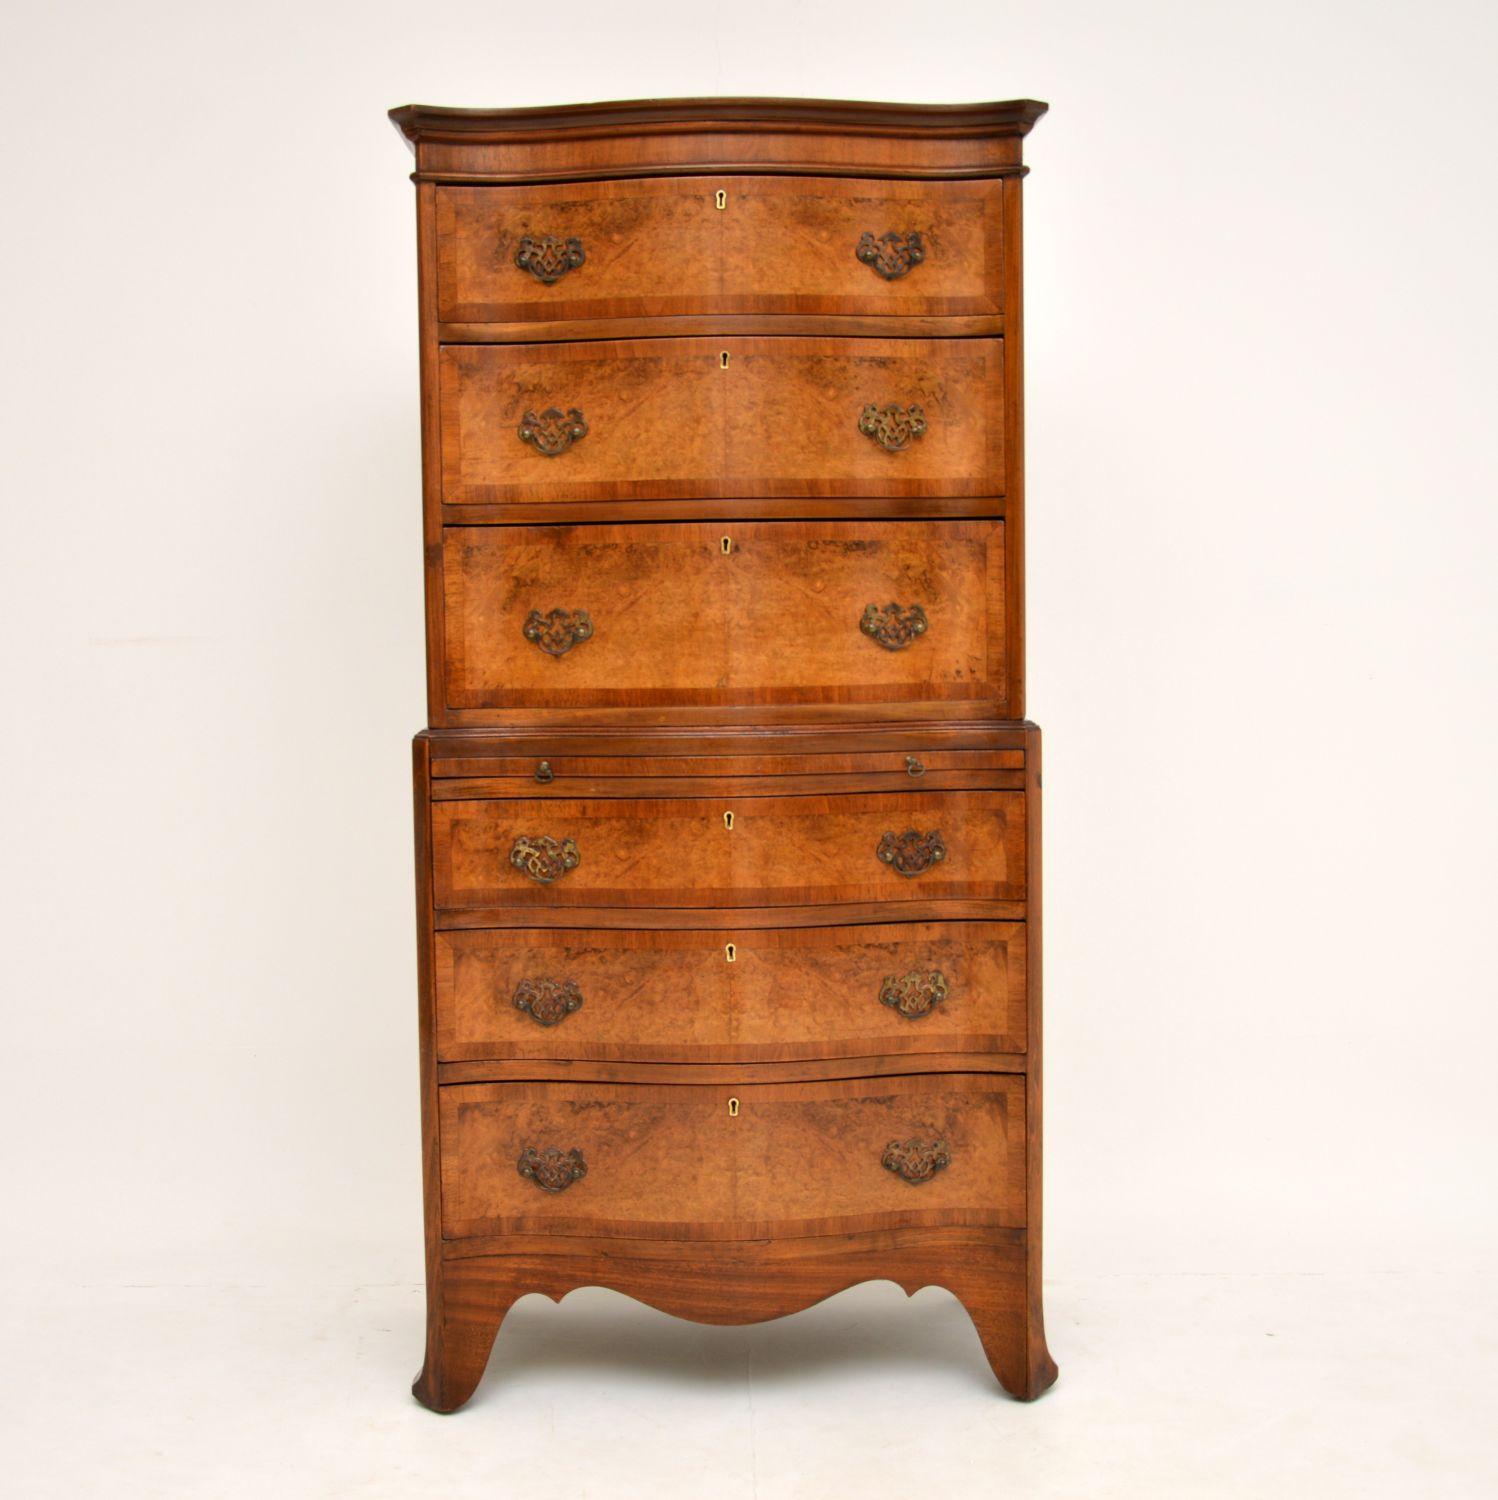 A stunning antique burr walnut chest on chest with a serpentine shaped front and canted corners. This is in the Classic Georgian style, it dates from circa 1890-1910 period.

The quality is amazing and this has beautiful burr walnut veneers, all